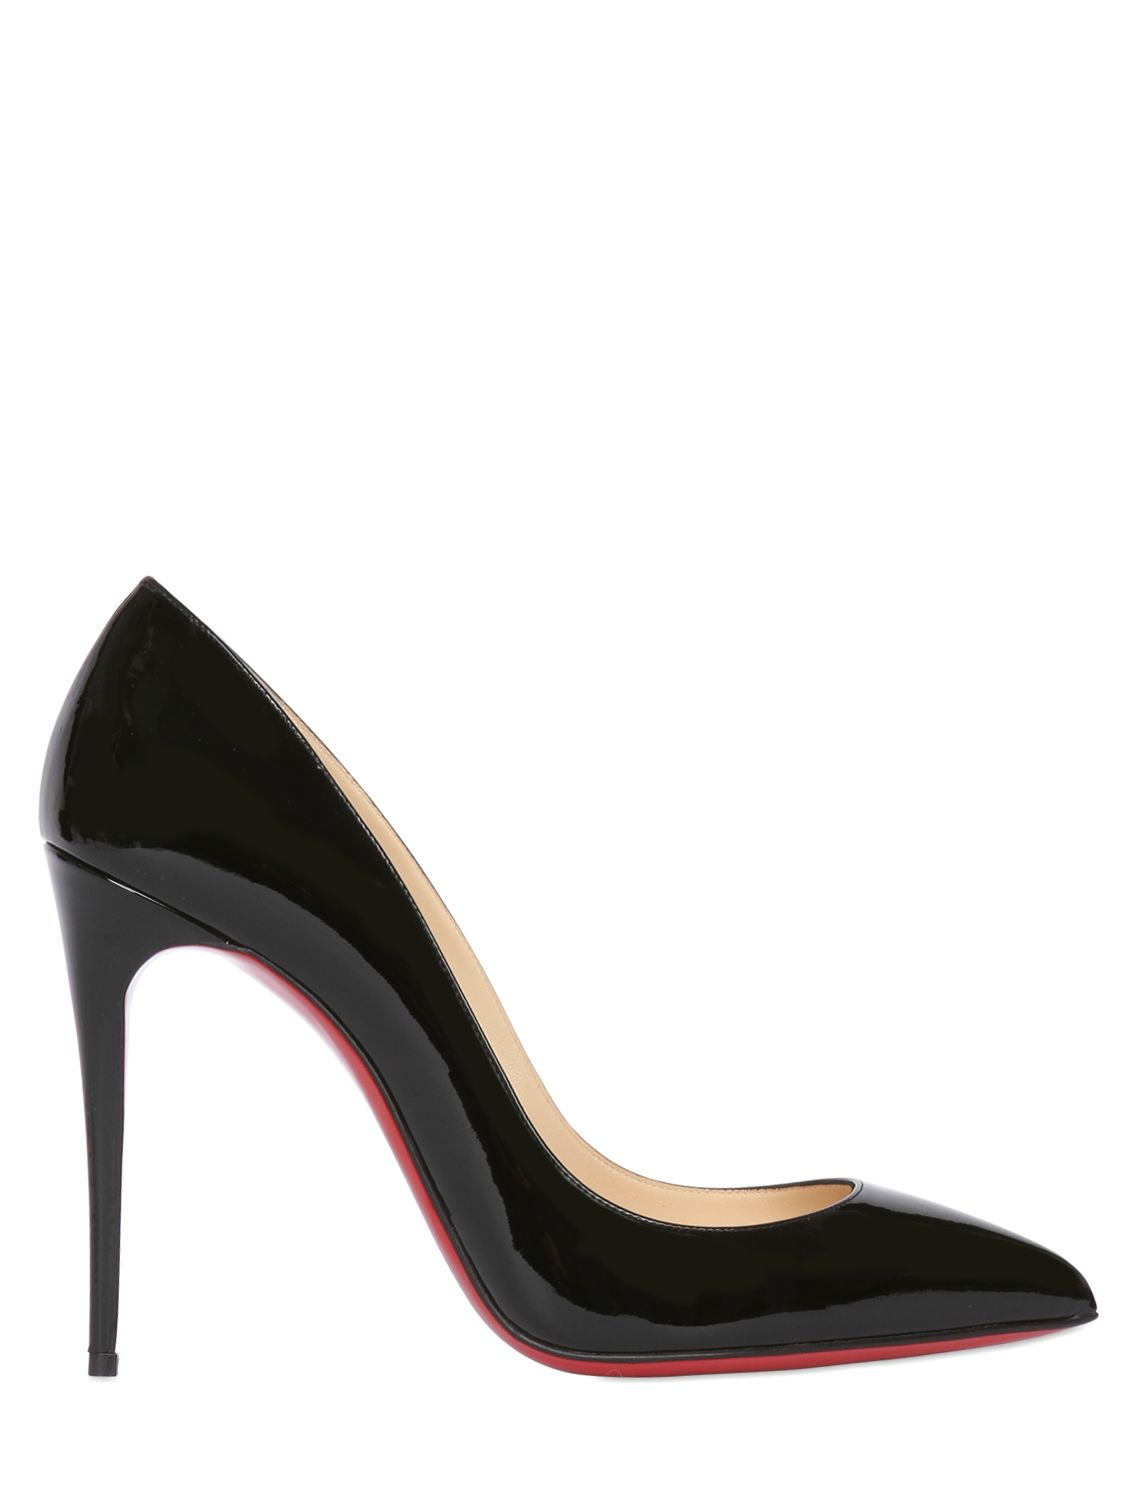 Christian louboutin Pigalle Follies Patent Leather Pumps in Black ...